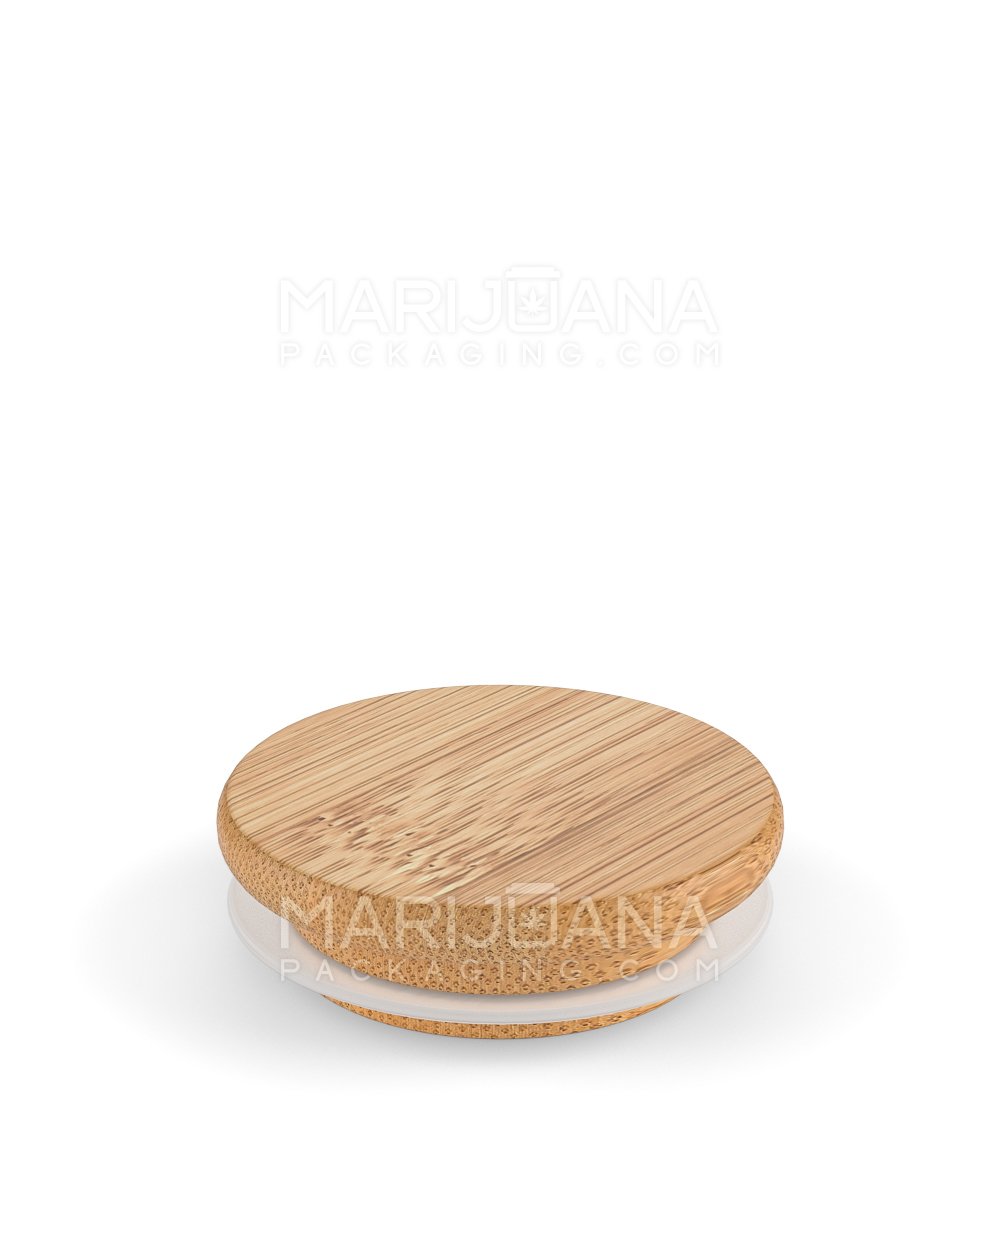 Glass Jar with Wooden Lid | 10oz - 80 Dram - 80 Count - 10